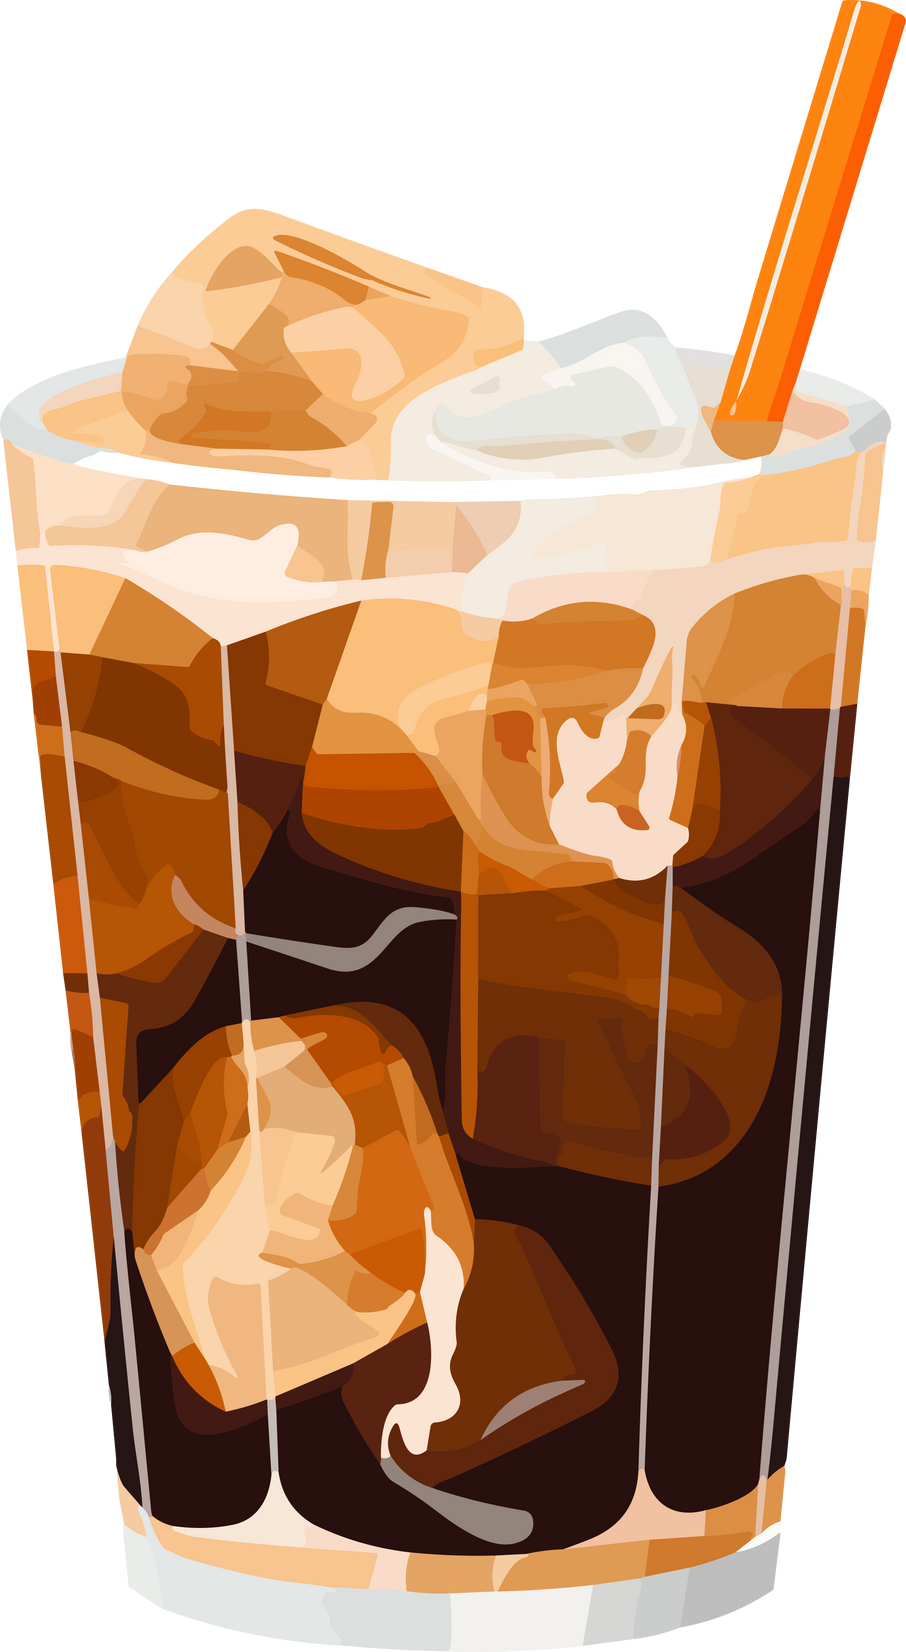 Iced Coffee in a transparent glass